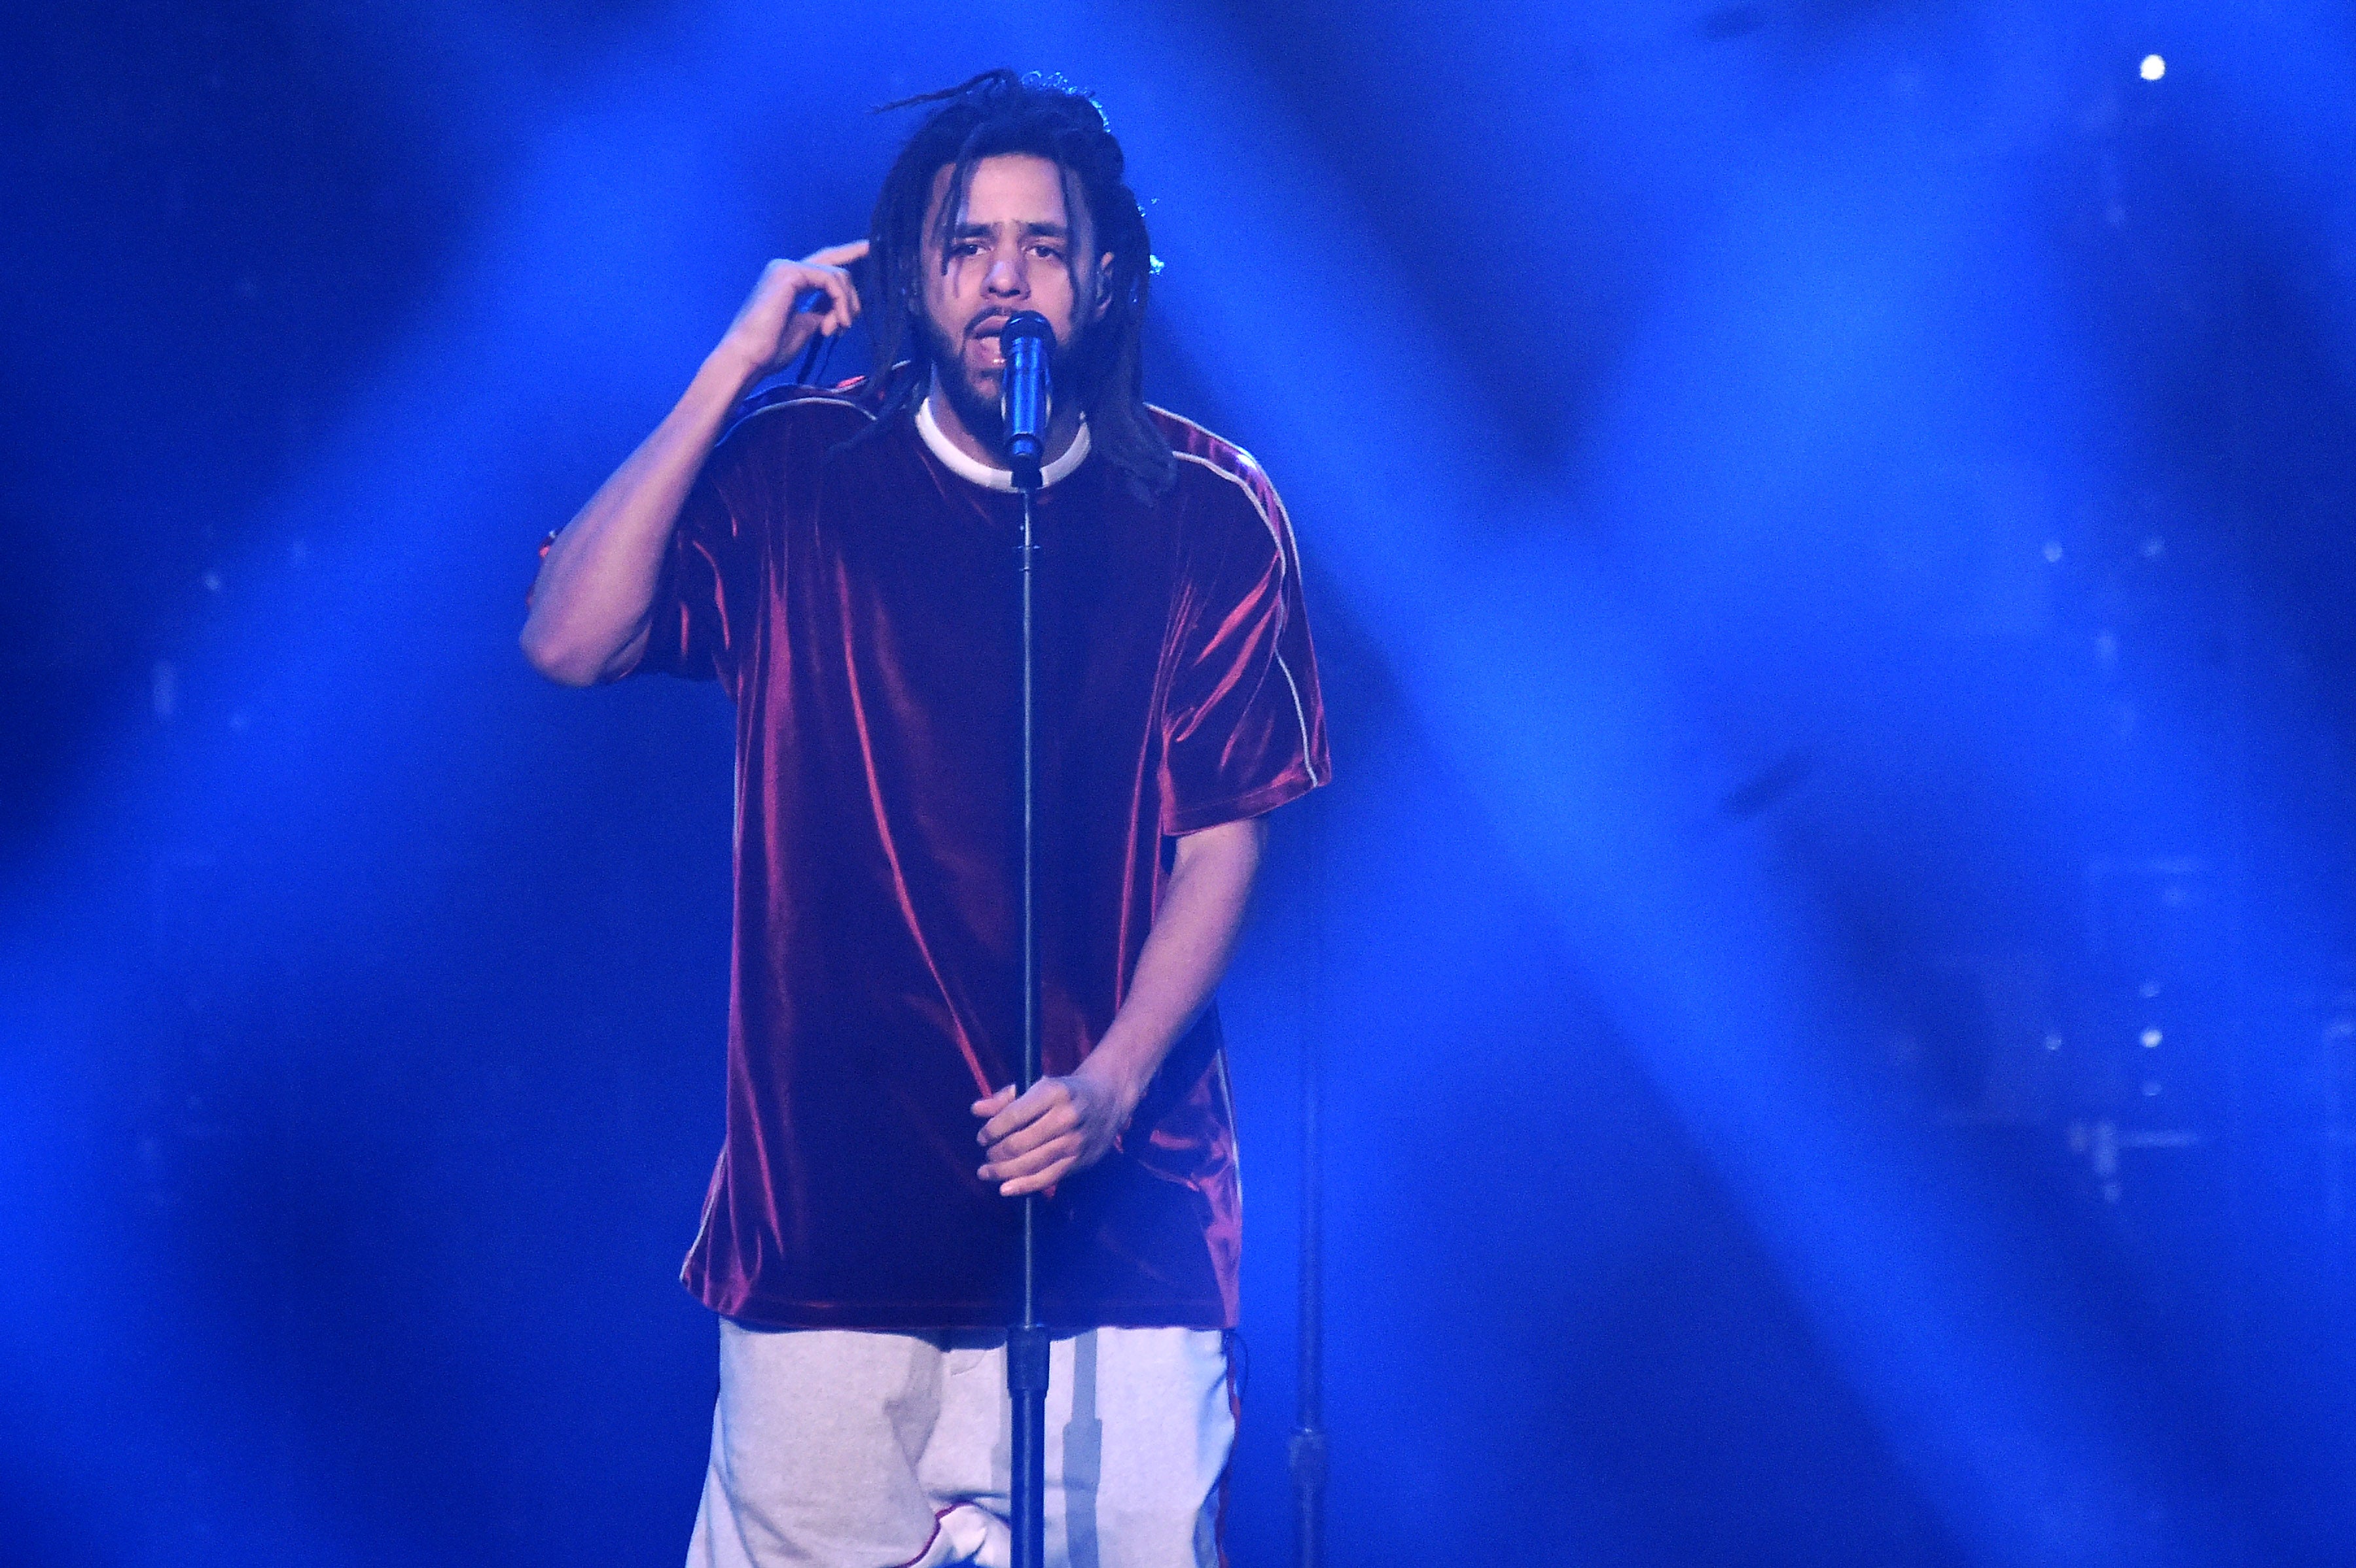 Is J. Cole’s ‘Snow On Tha Bluff’ Calling Out Fellow Rapper Noname?